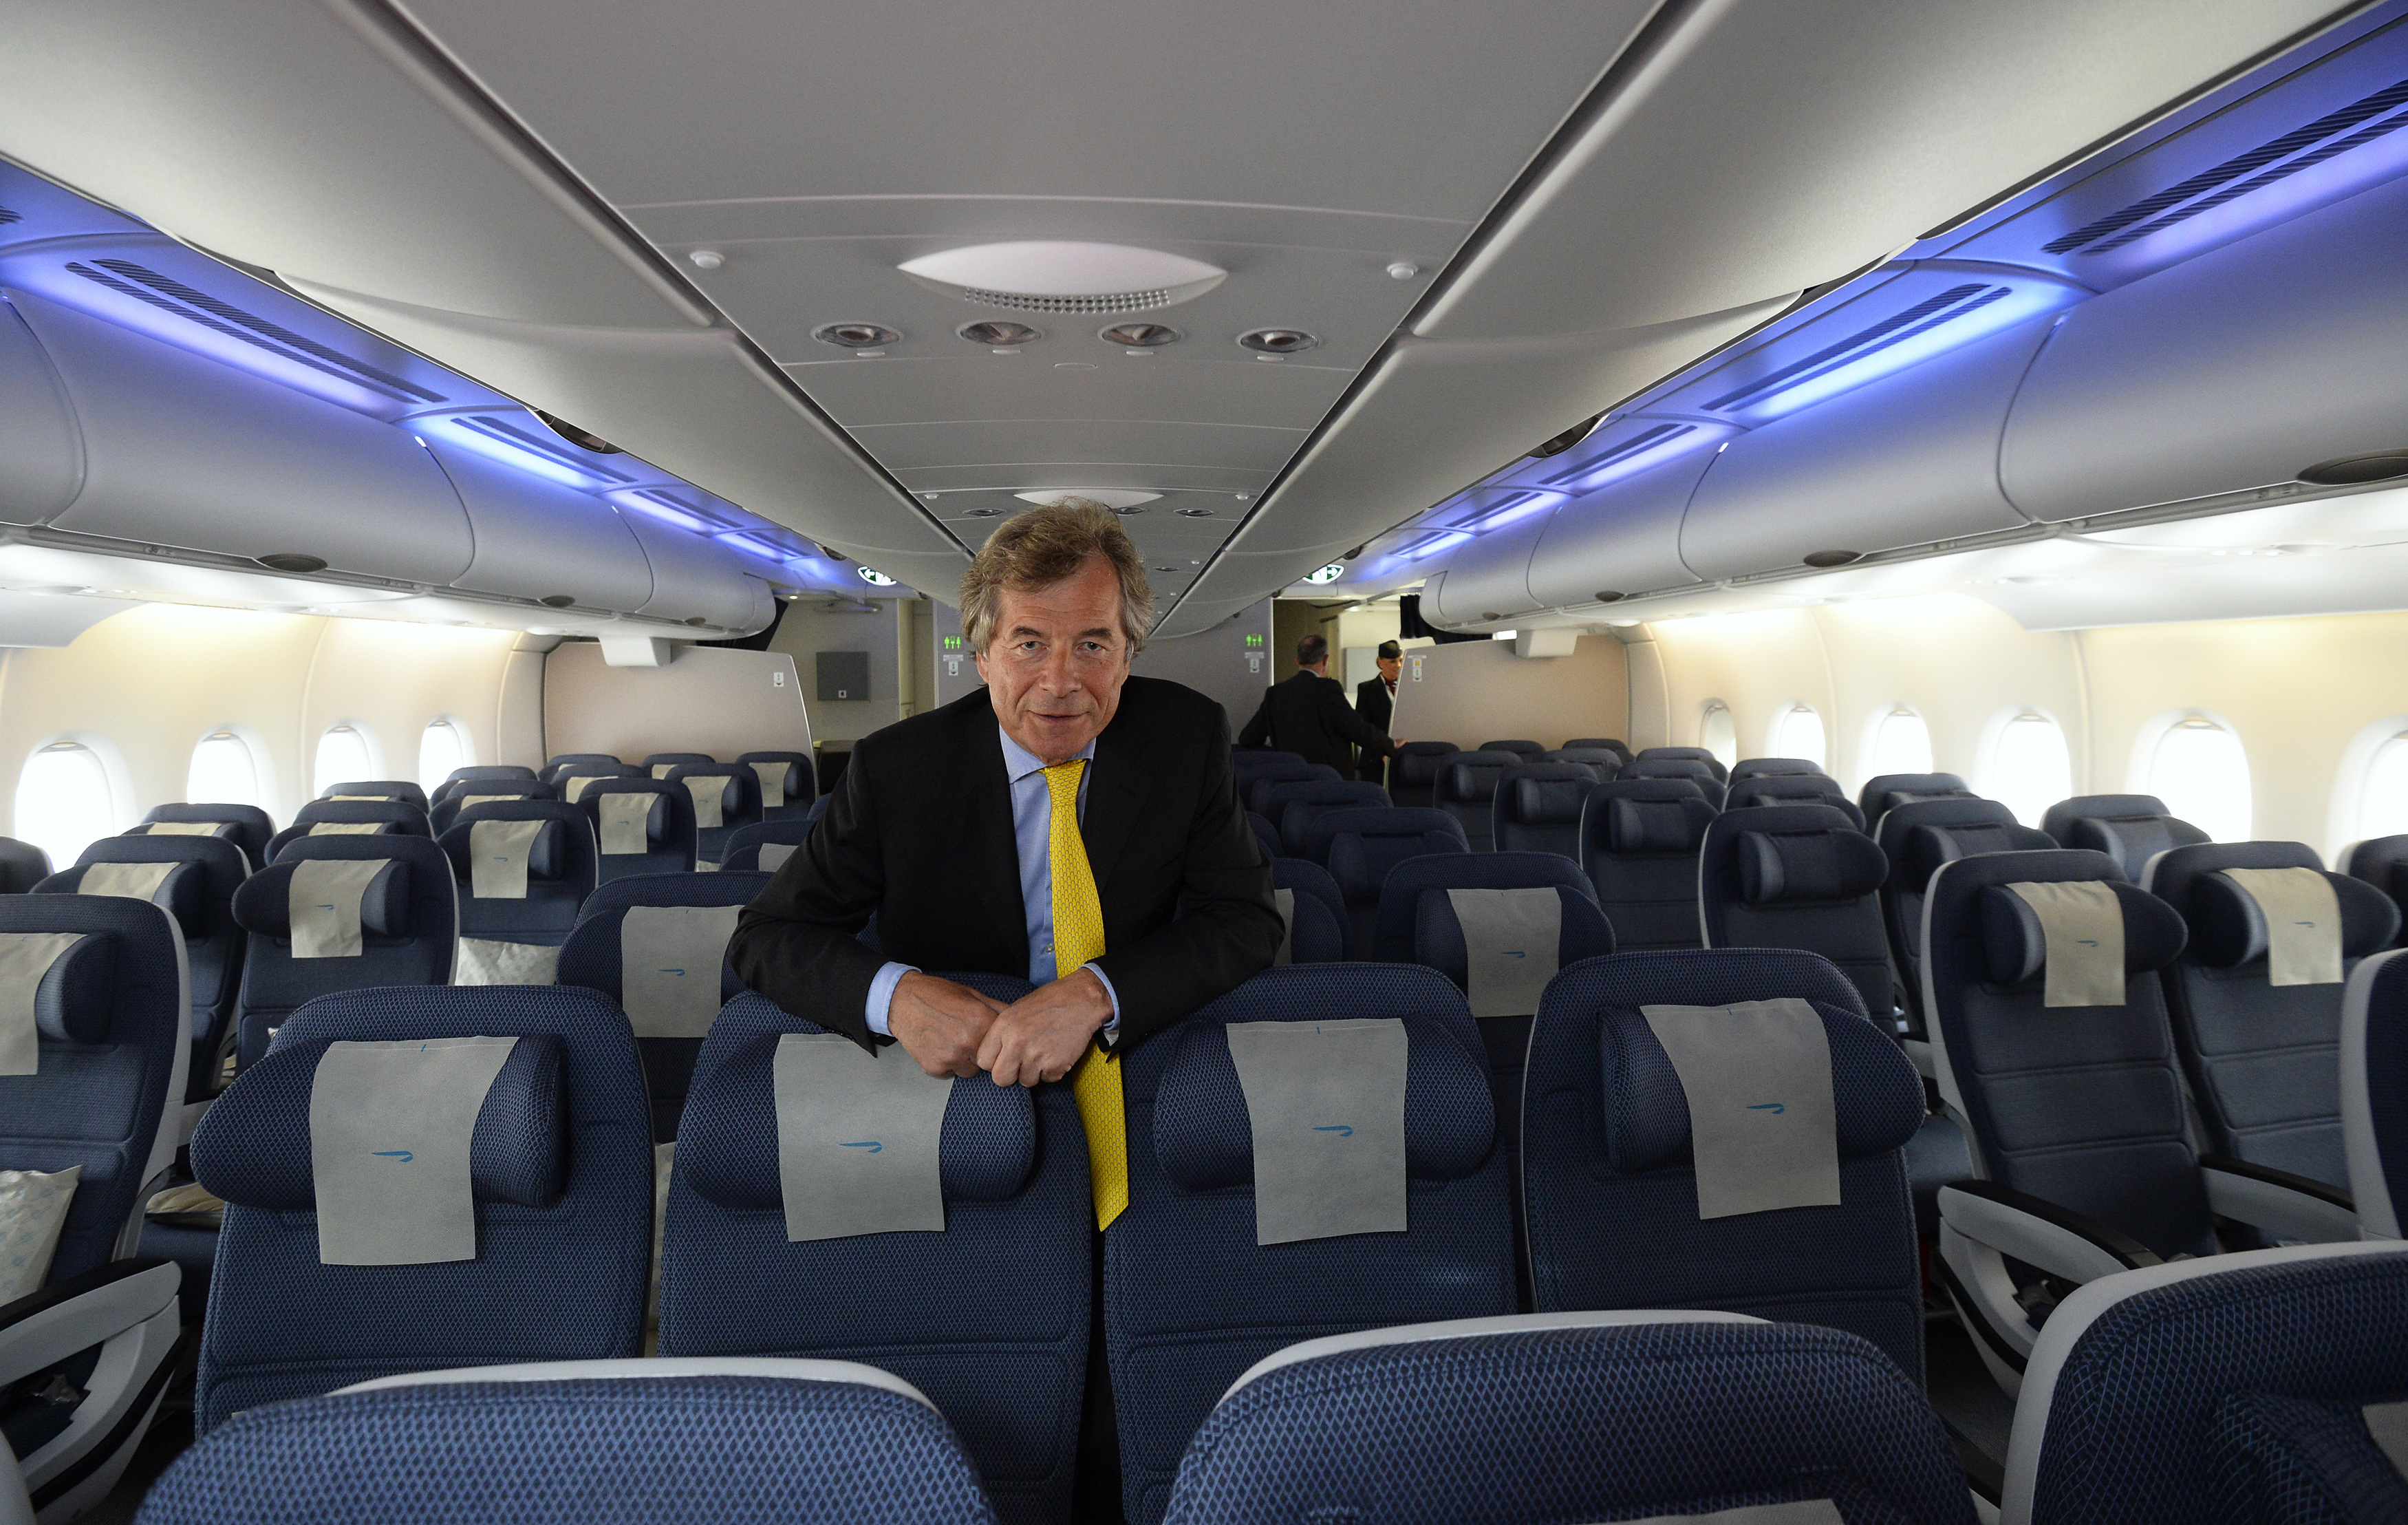 British Airways Chairman, Martin Broughton, poses for photographs in the world traveller cabin of the British Airways Airbus A380 at Heathrow airport in London